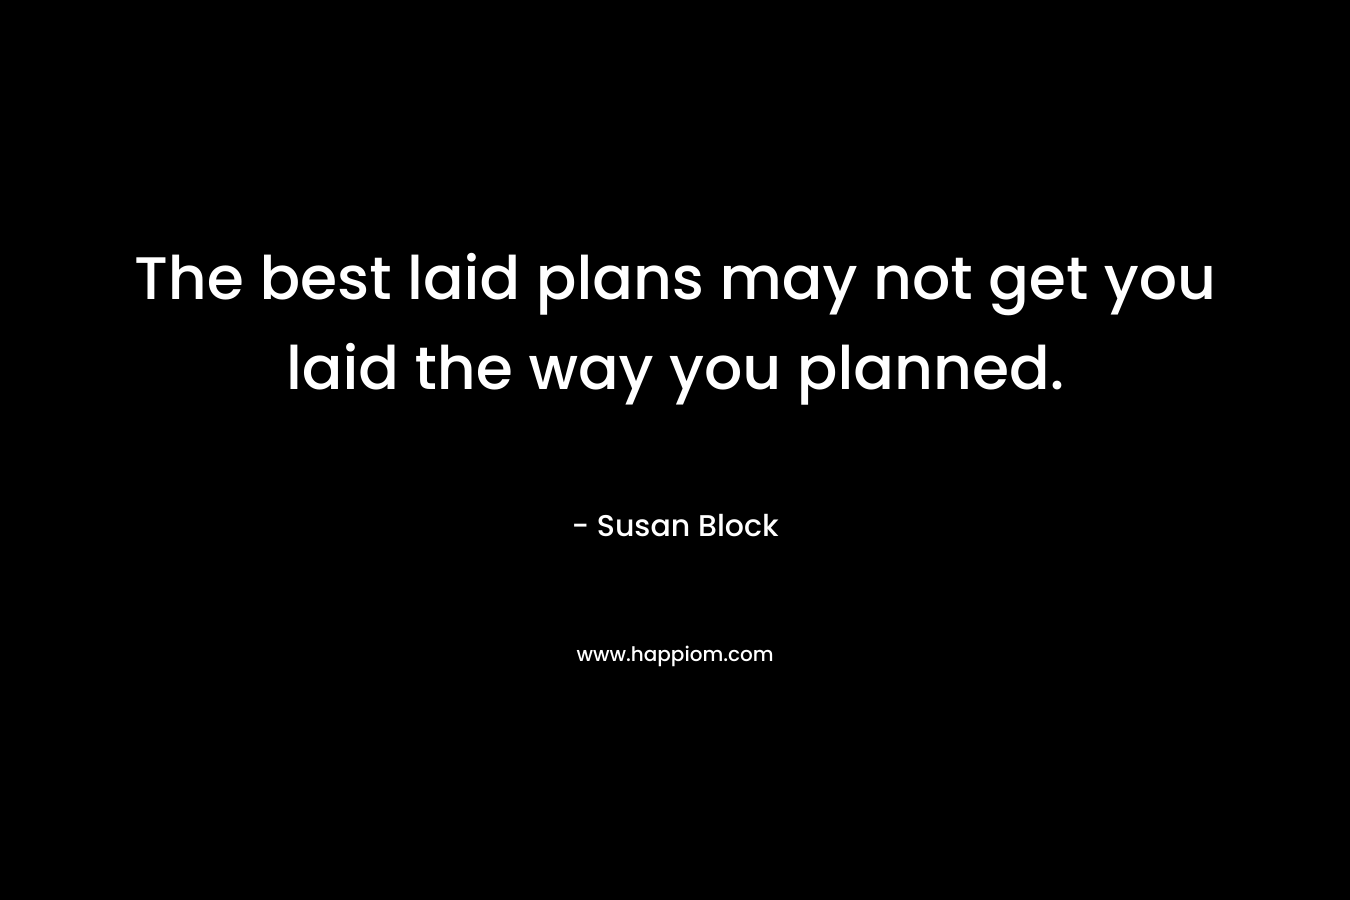 The best laid plans may not get you laid the way you planned.